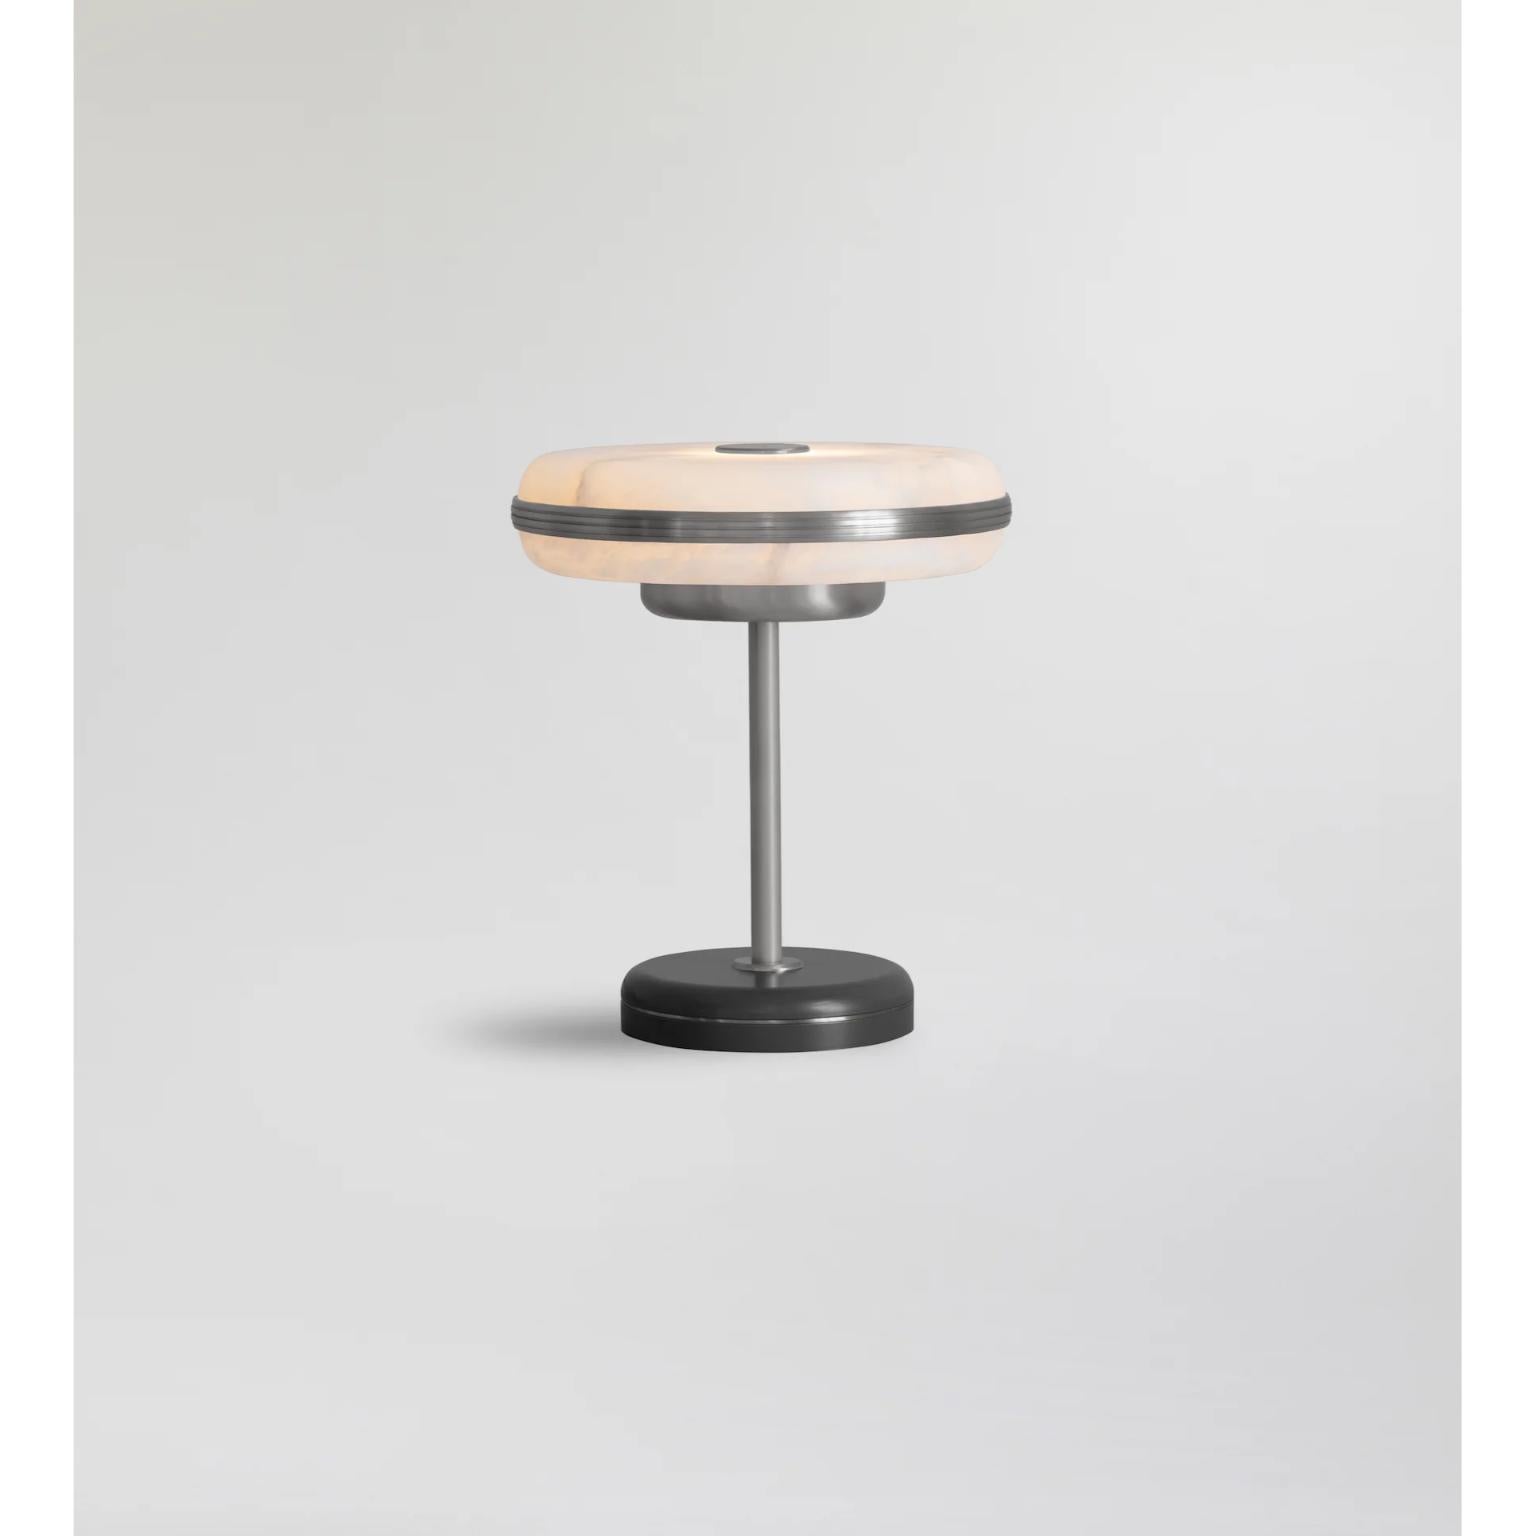 Beran Satin Nickel Small Table Lamp by Bert Frank
Dimensions: Ø 26 x H 28 cm.
Materials: Satin nickel and alabaster.
Base finish: Olive.

Available in two different sizes. Available in different finishes and materials. Please contact us. 

The